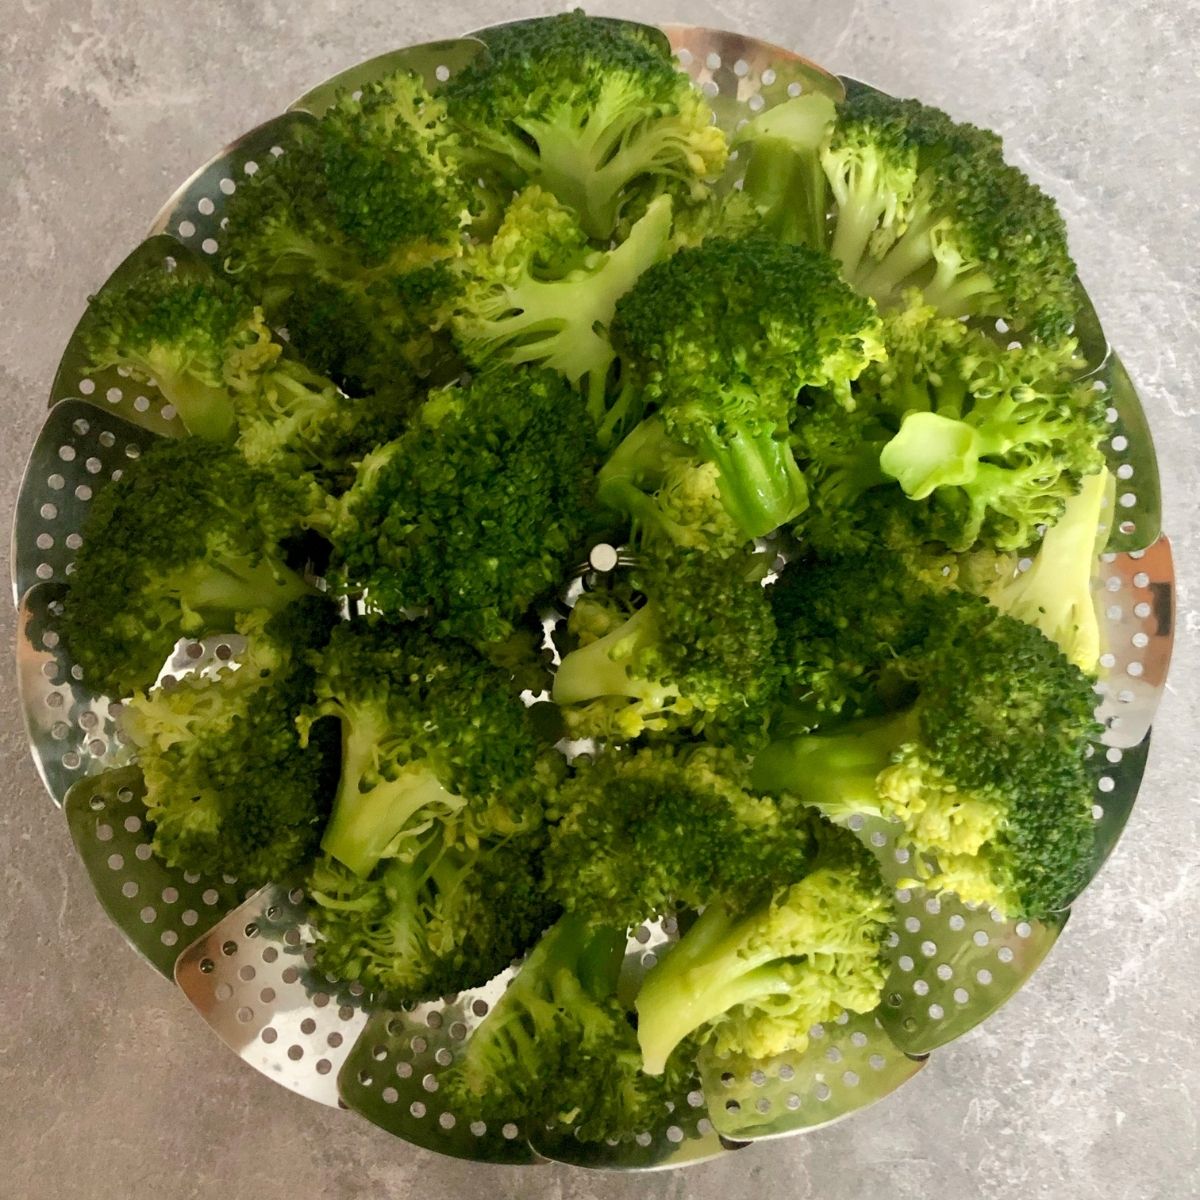 vibrantly colored steamed broccoli sitting on a steaming basket on gray background.